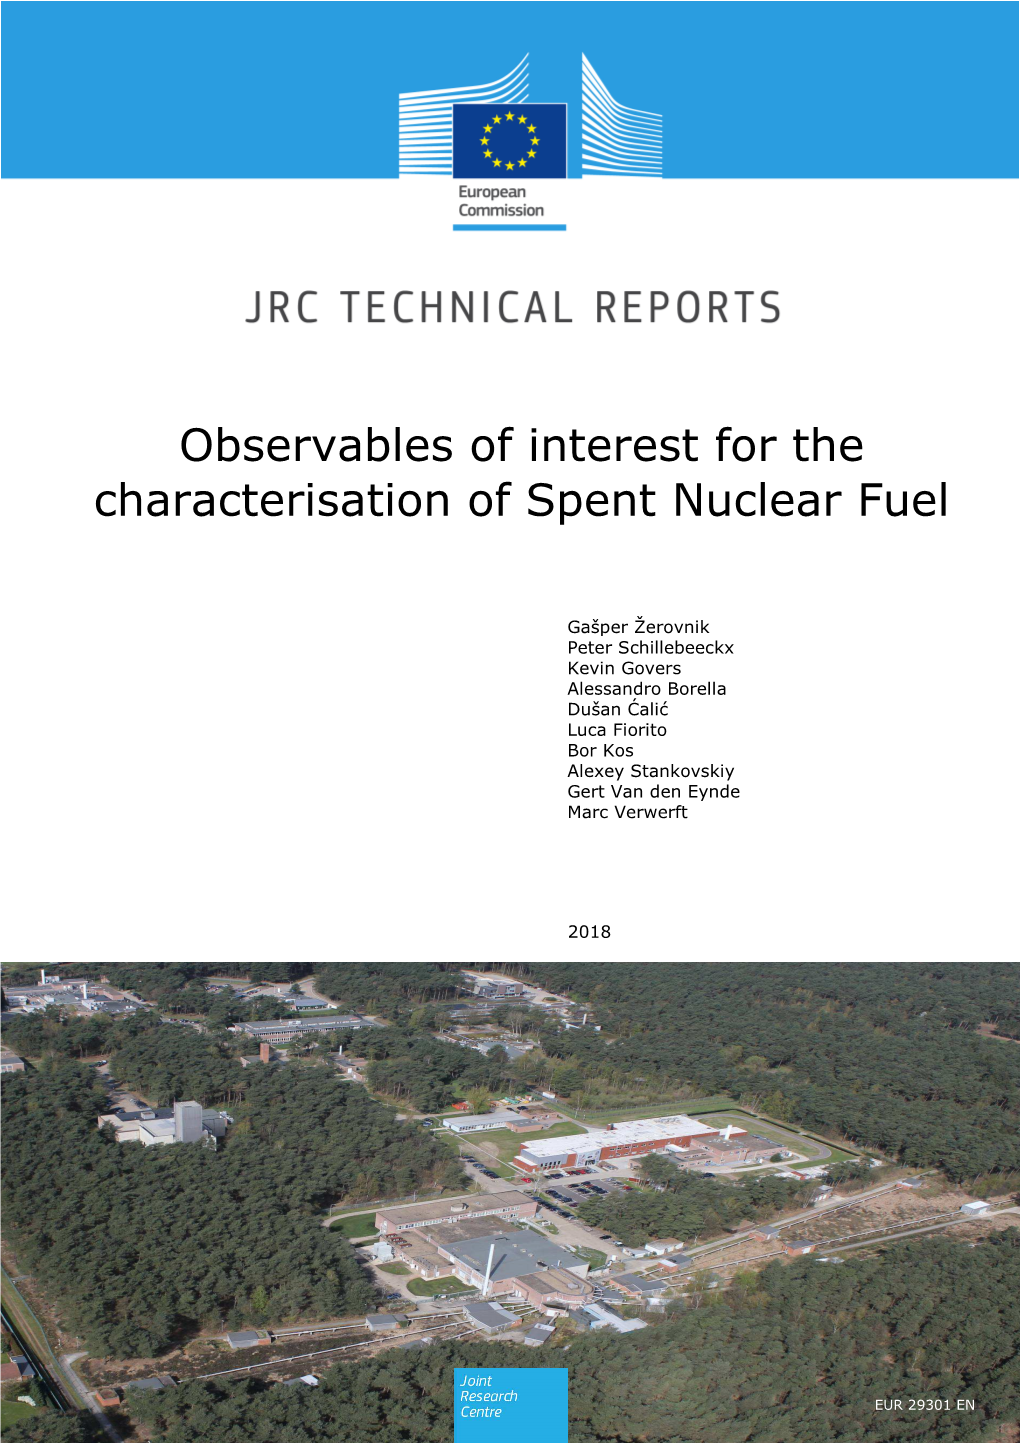 Observables of Interest for the Characterisation of Spent Nuclear Fuel